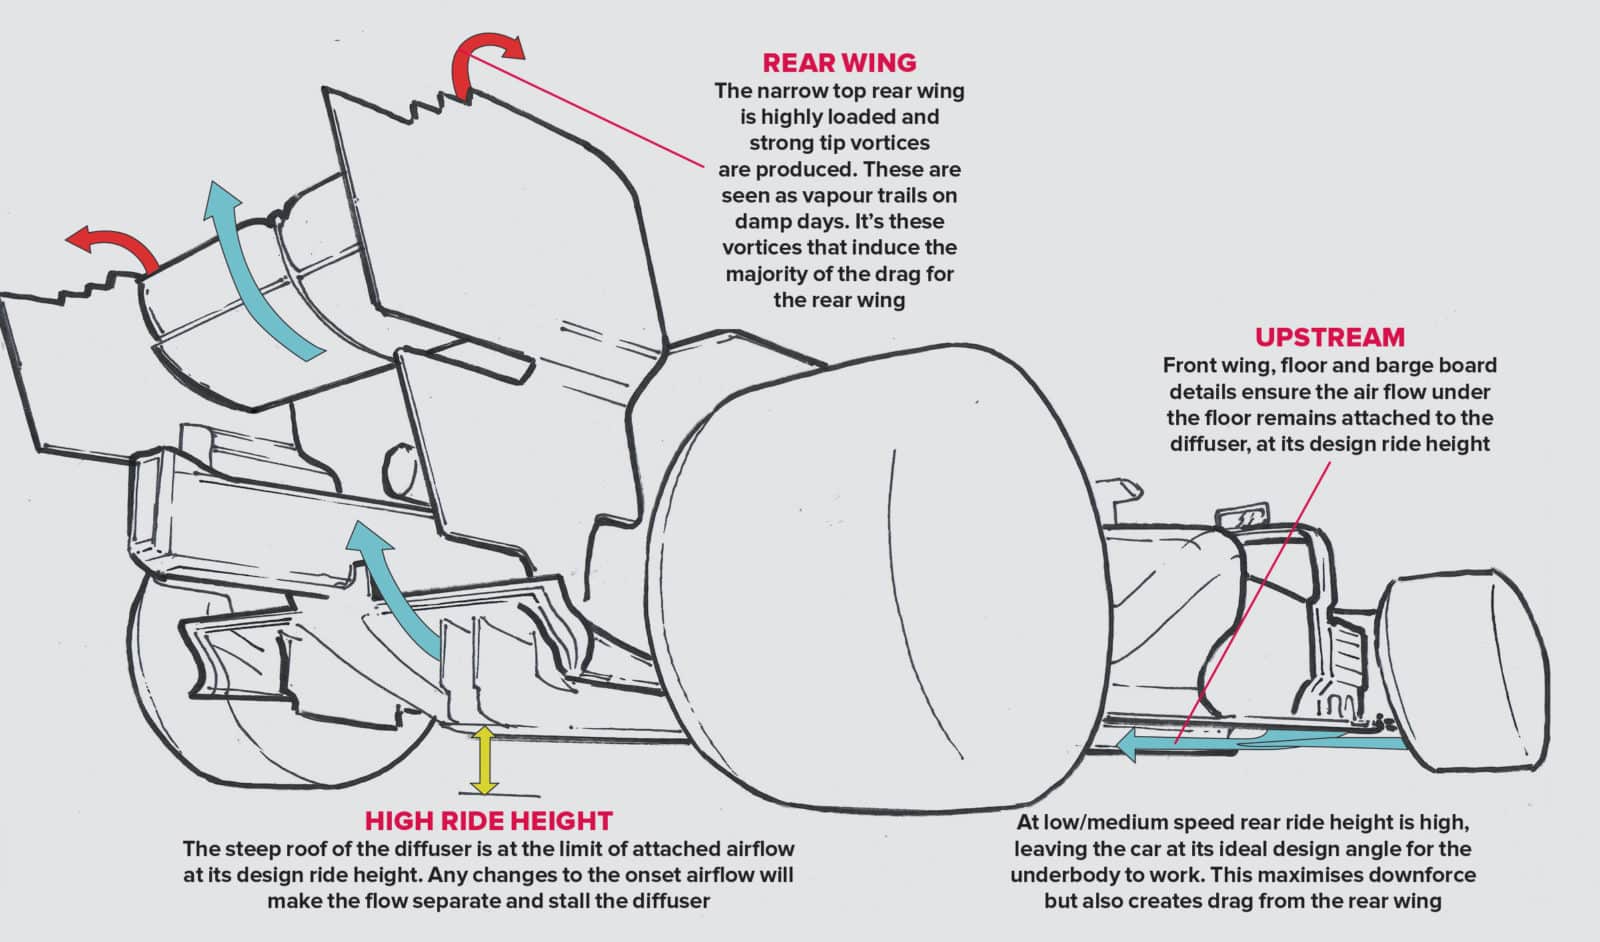 Mercedes high ride height graphic